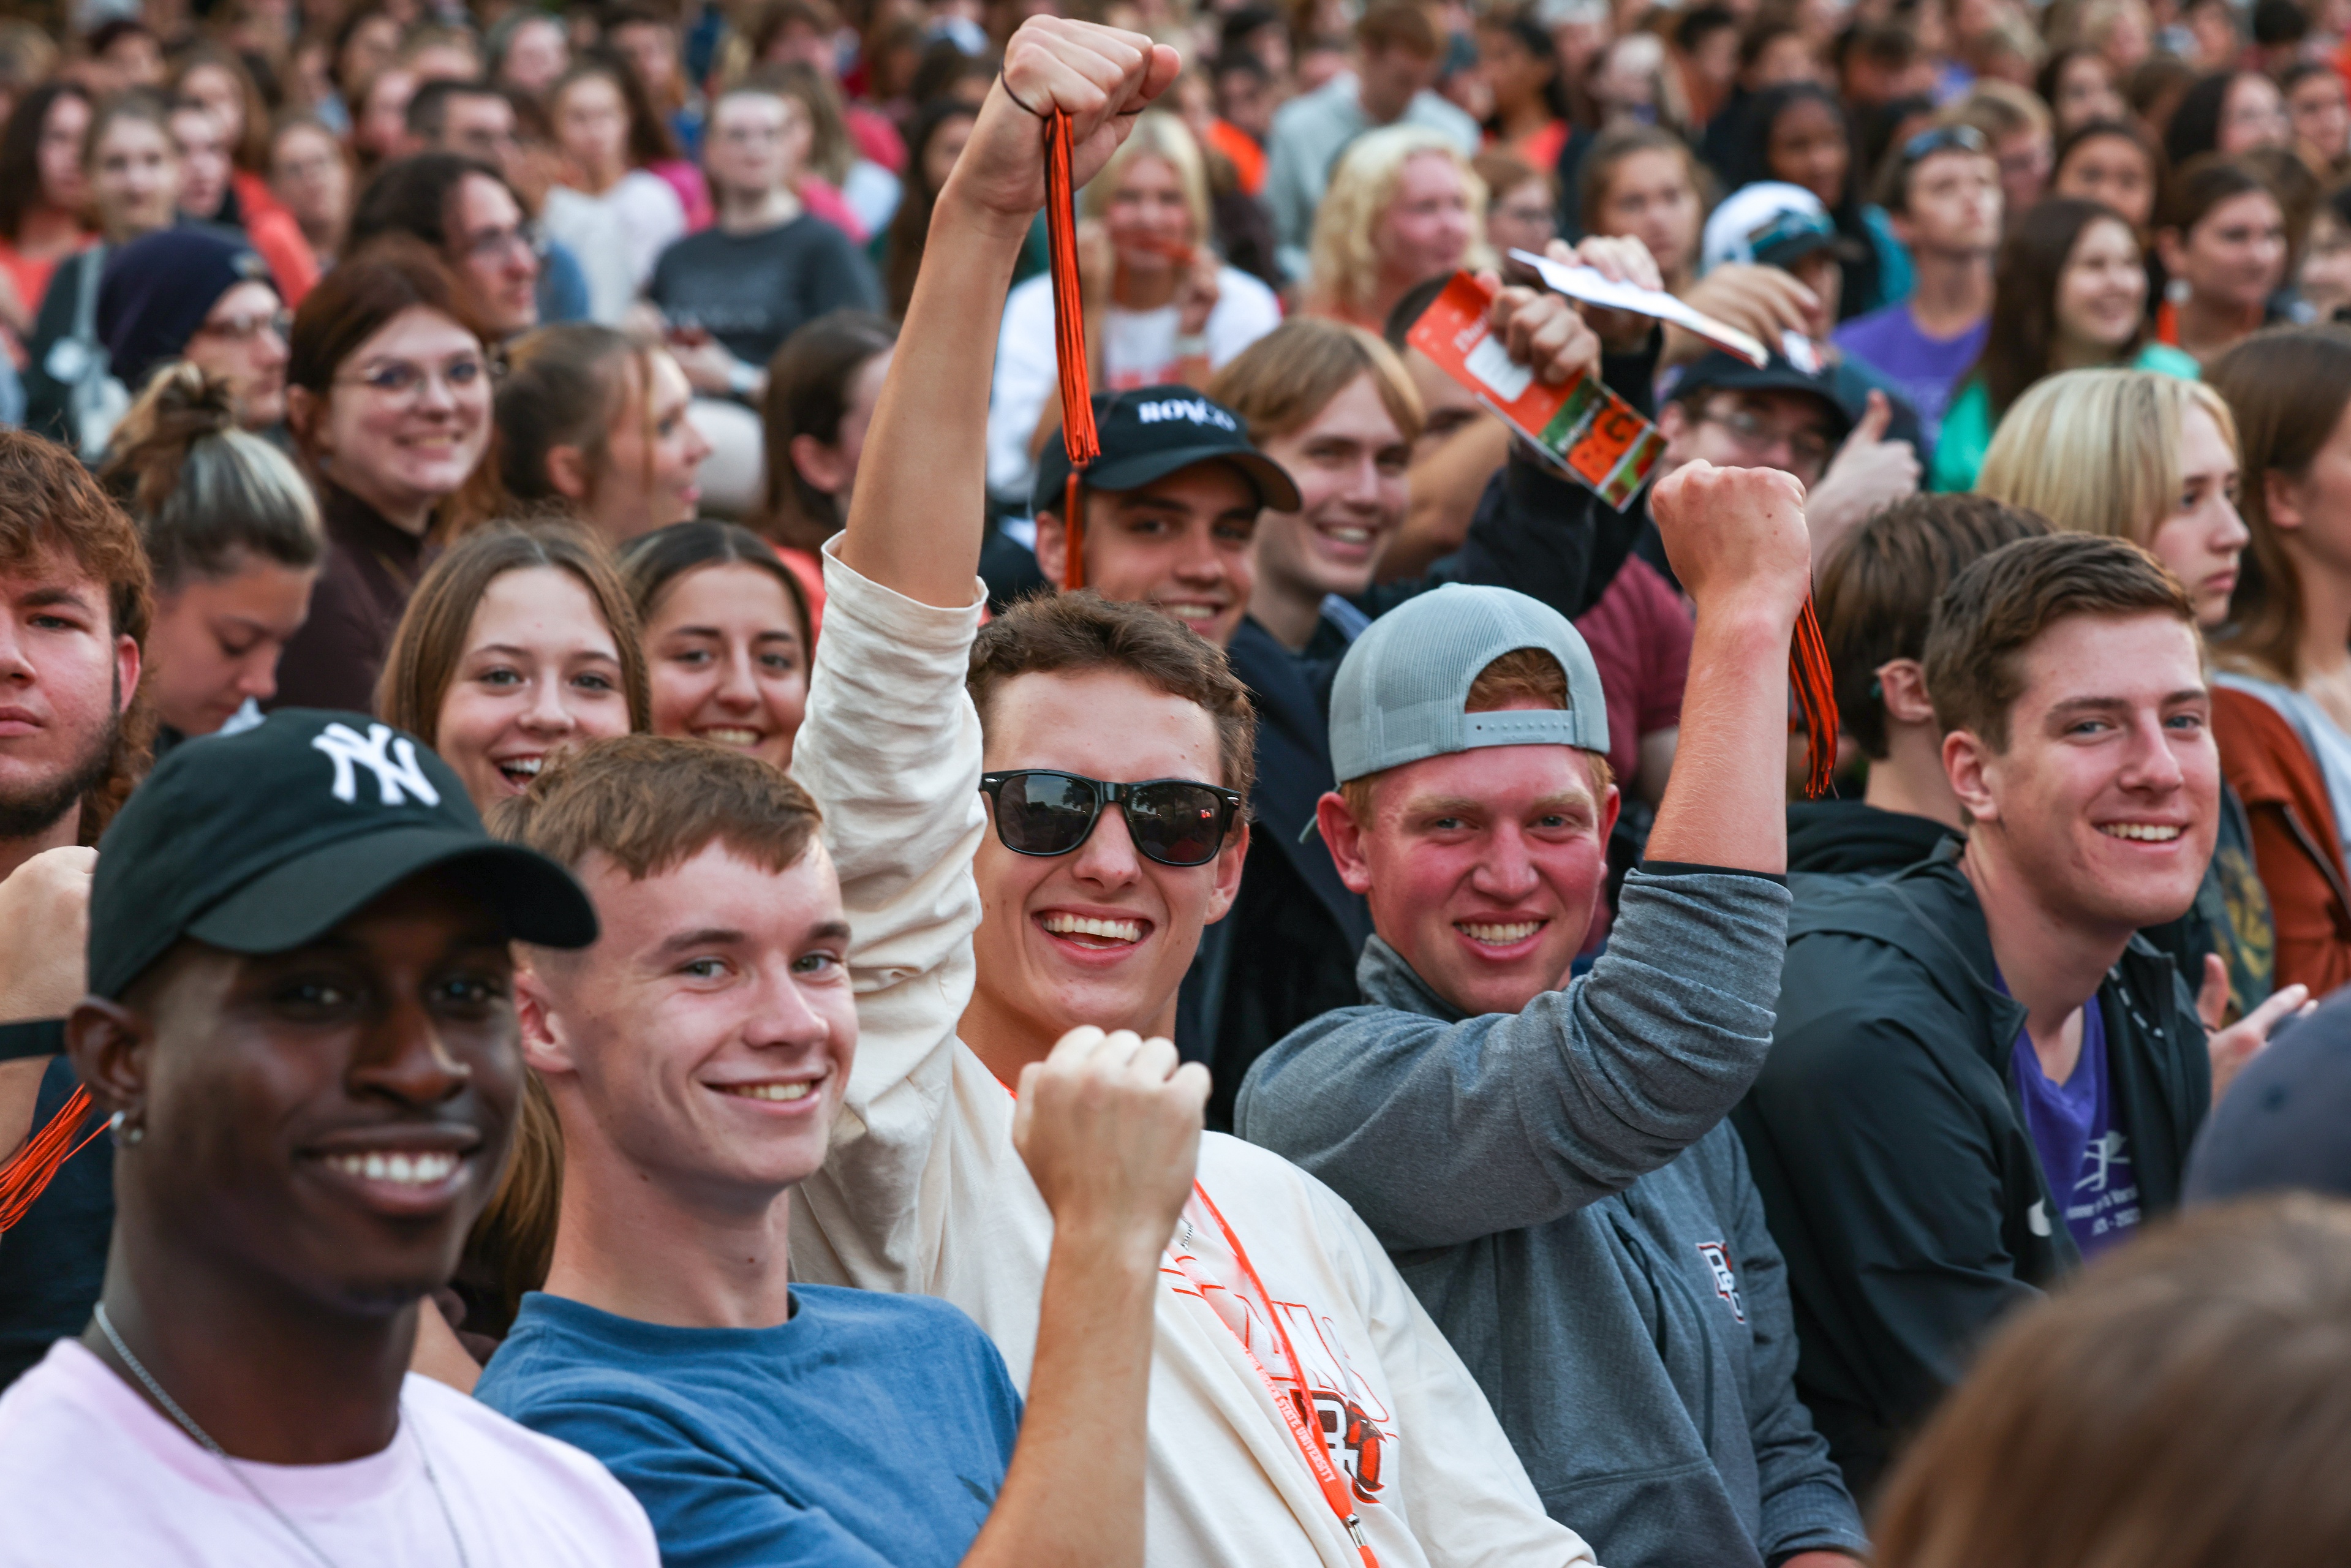 Students smile while attending BGSU Convocation.